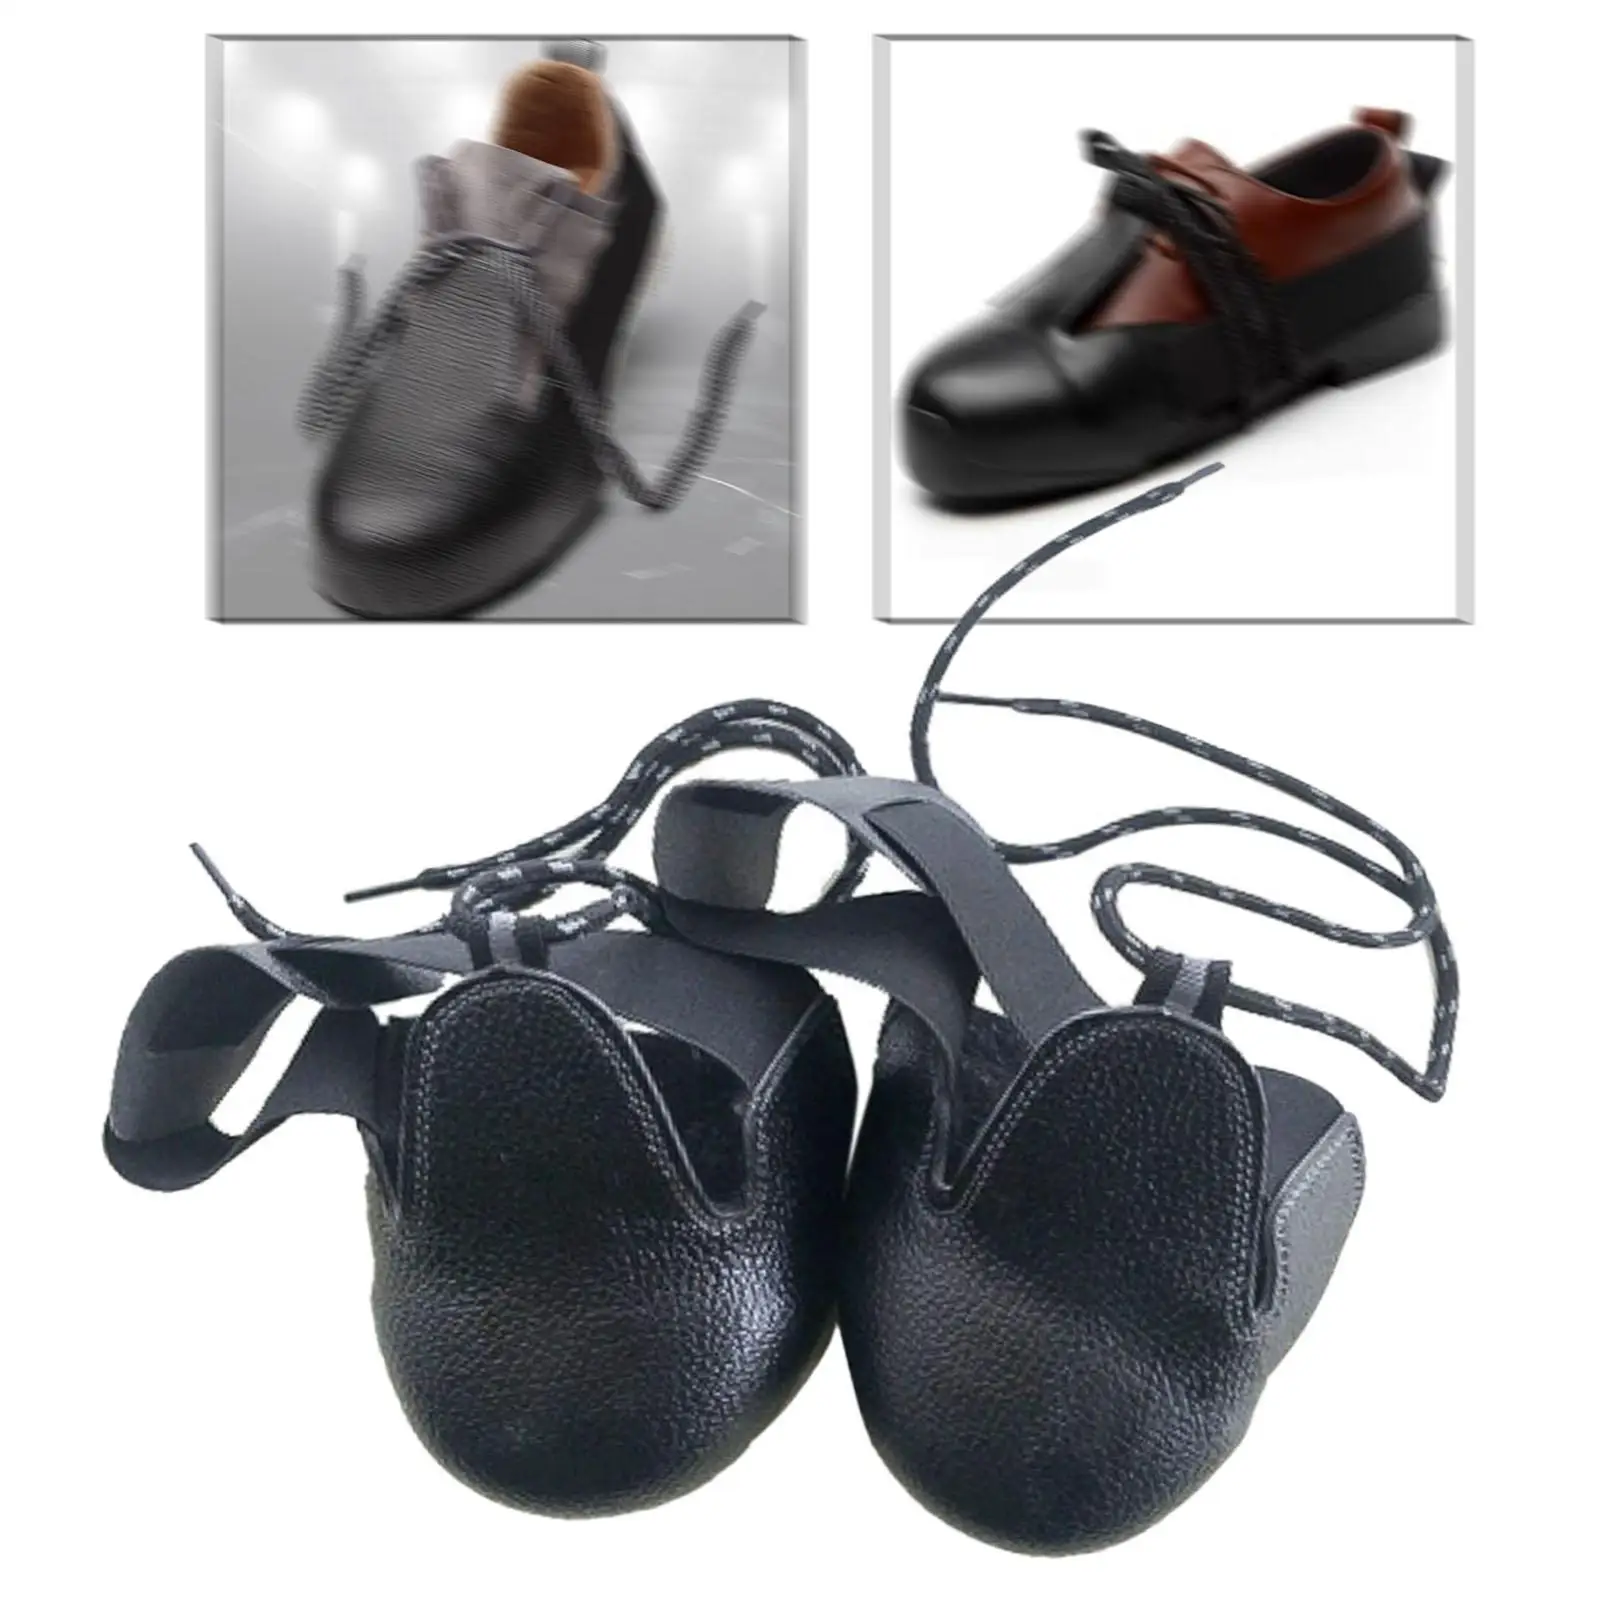 

Anti Smashing PU Leather Shoes Covers Size 36-45 Universal Anti Kick Shoe Covers Anti Slip for Industry Toe Cap Safety Overshoes